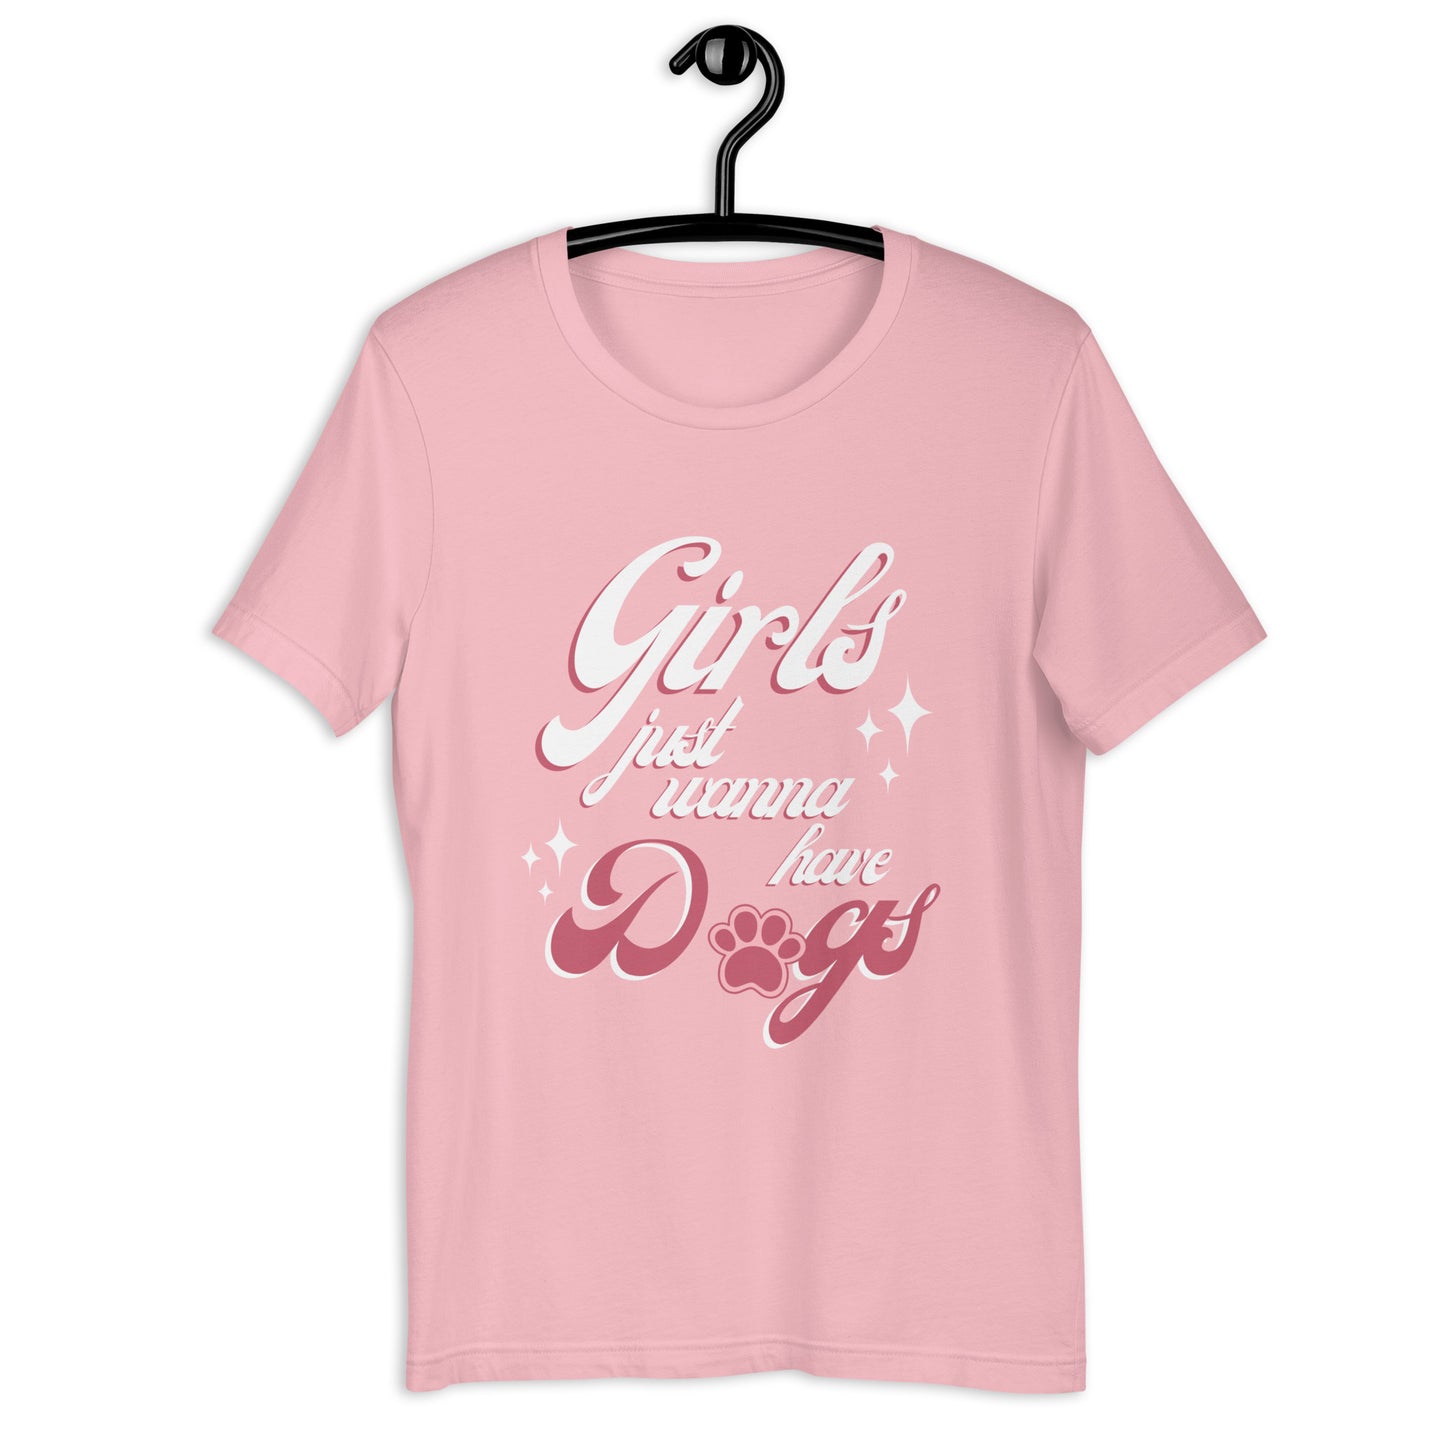 Pink Girls Just want to have Dogs Tee